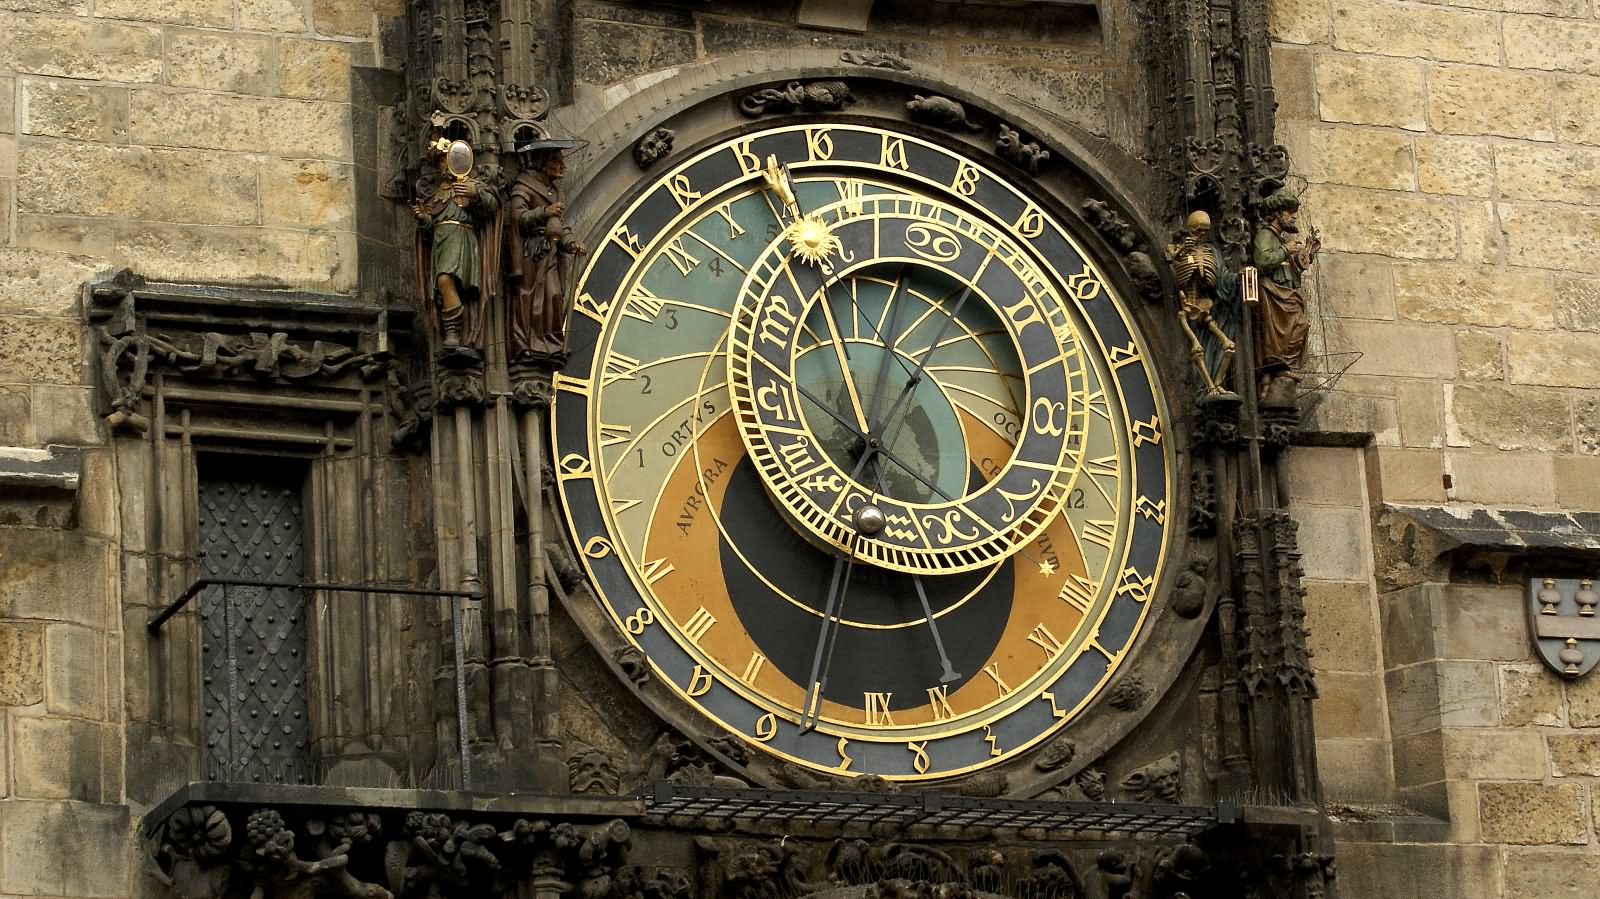 Closeup Of Astronomical Clock View At The Old Town Square